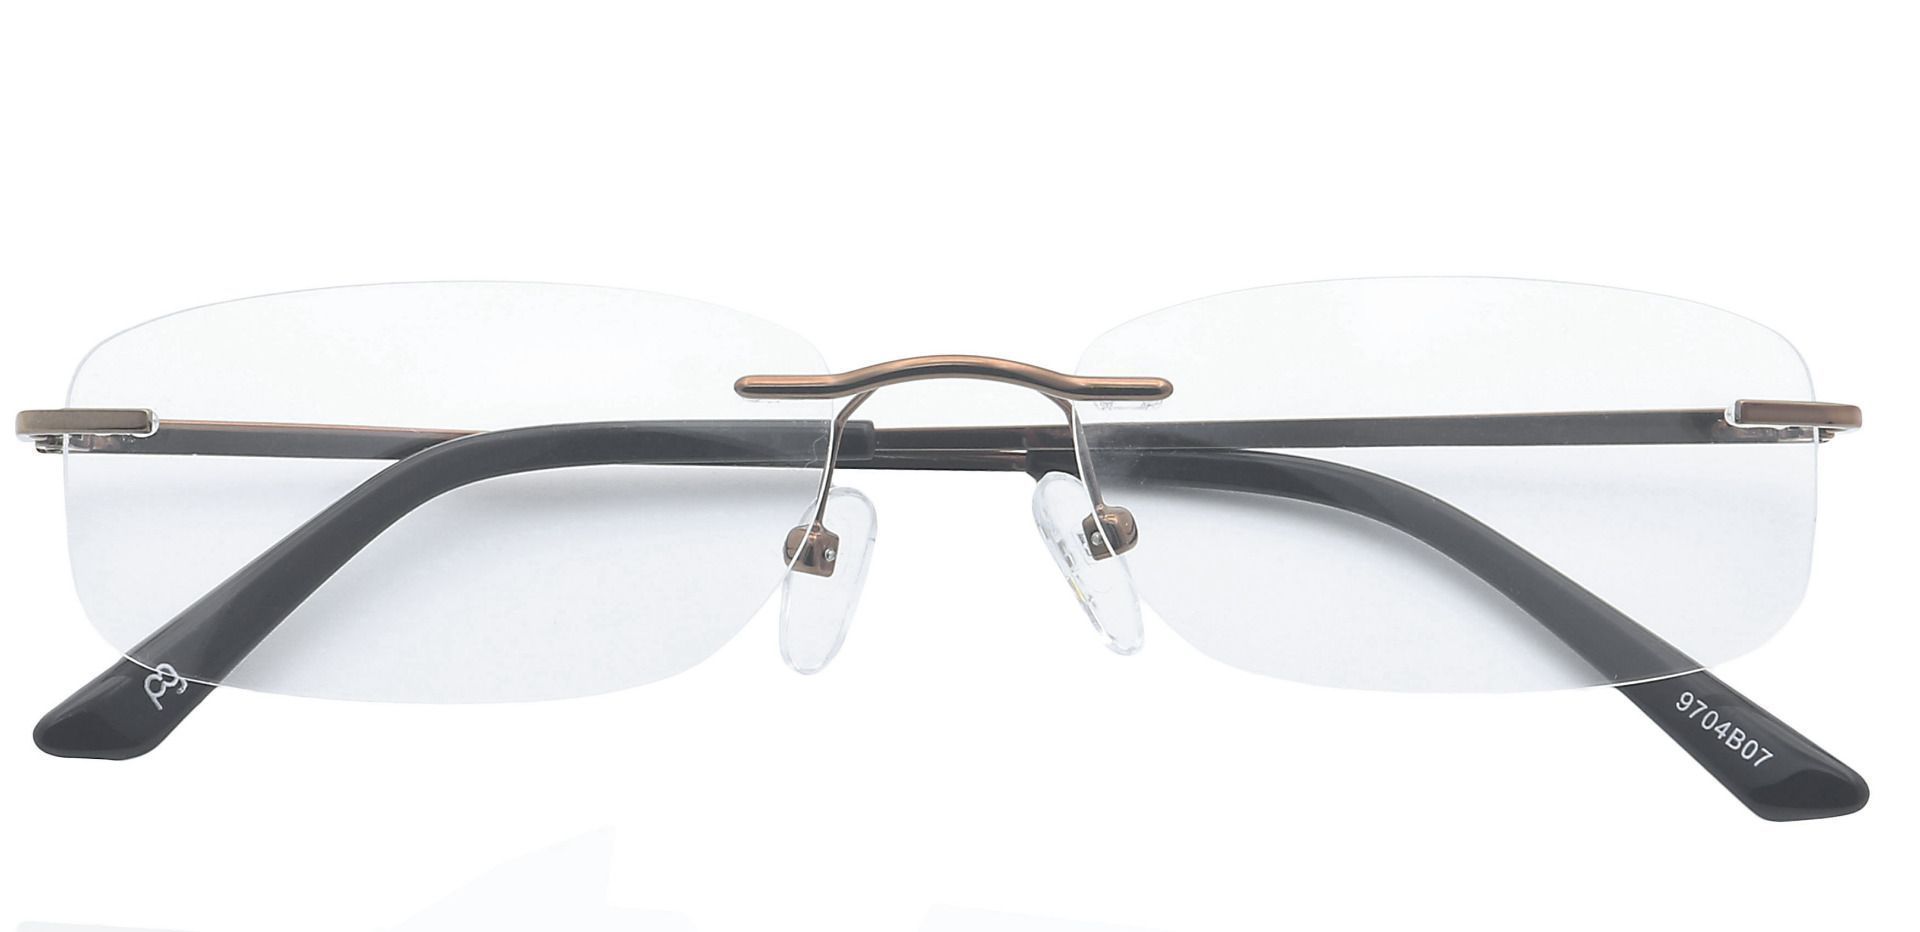 Remi Rimless Lined Bifocal Glasses - Brown